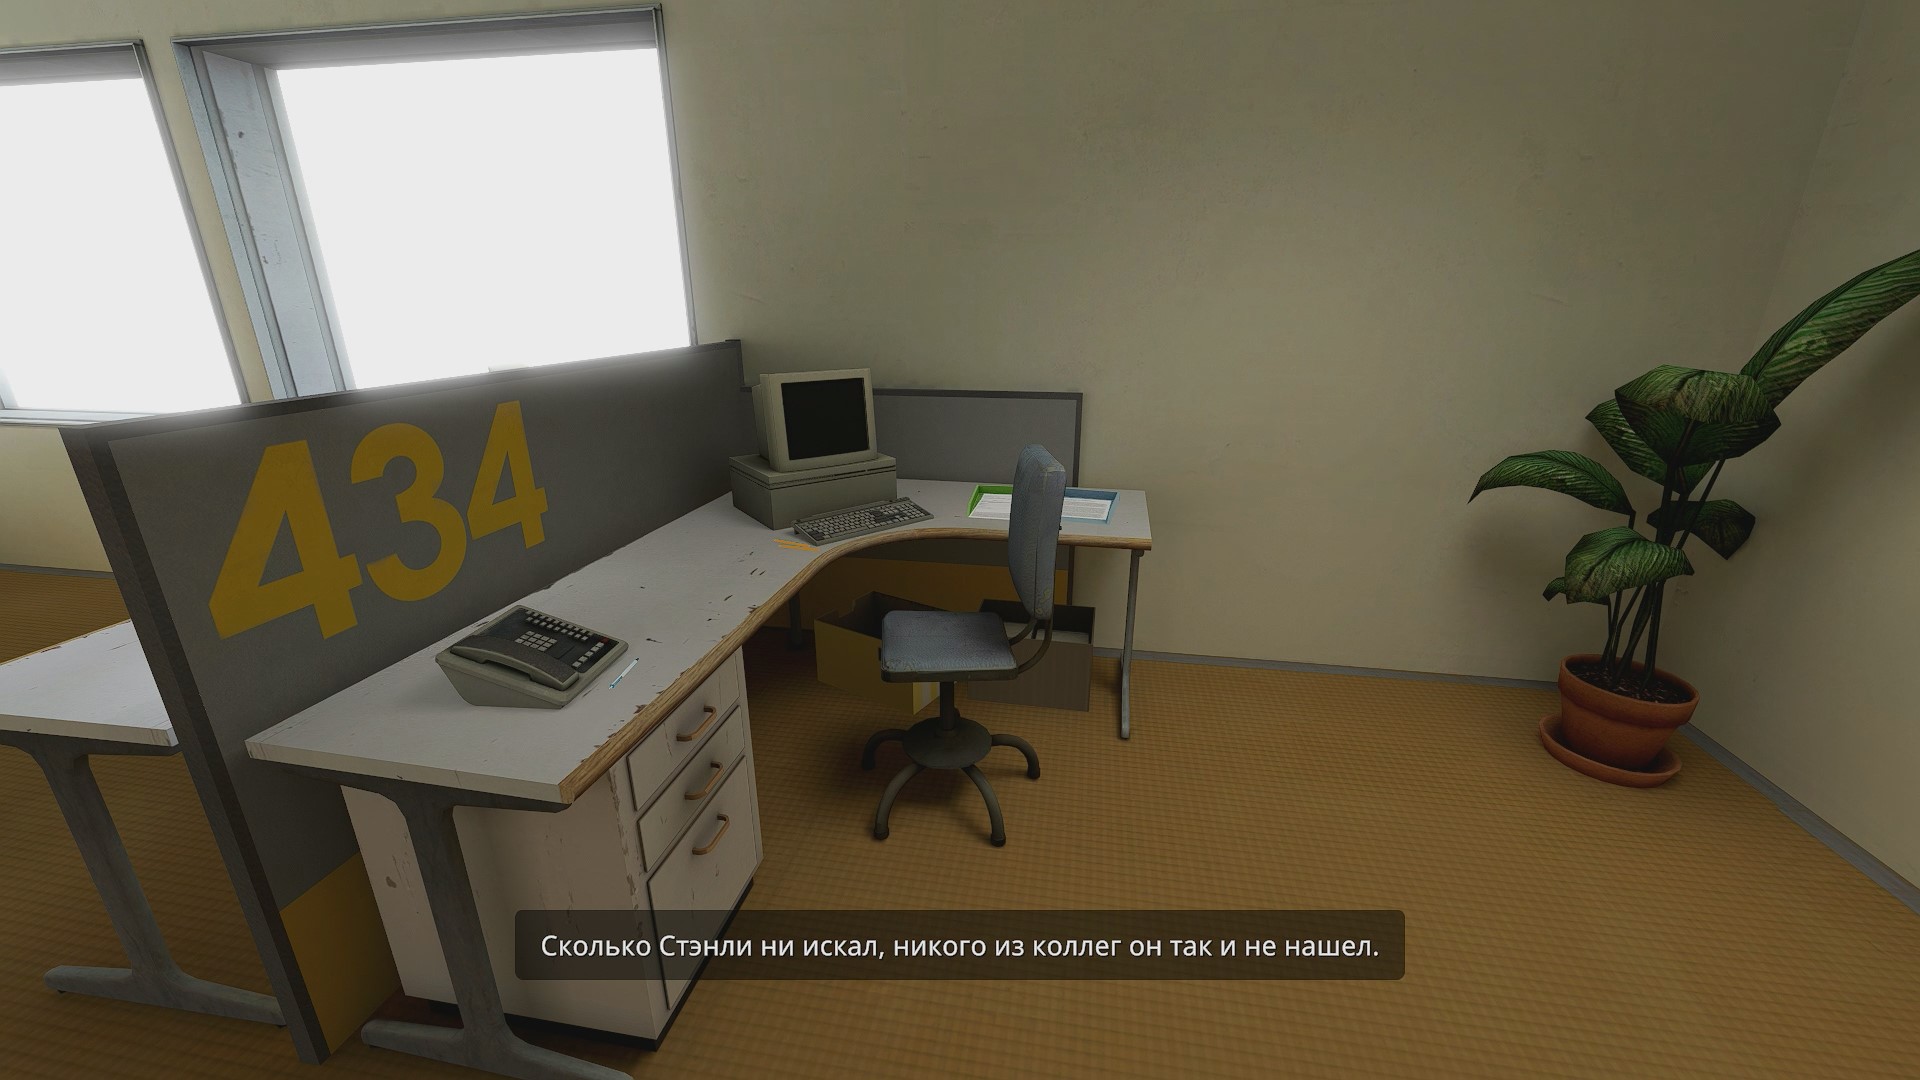 Stanley parable deluxe концовки. The Stanley Parable: Ultra Deluxe. Стэнли из the Stanley Parable. The Stanley Parable Ultra Deluxe концовки. Стэнли парабл ультра Делюкс игрок.